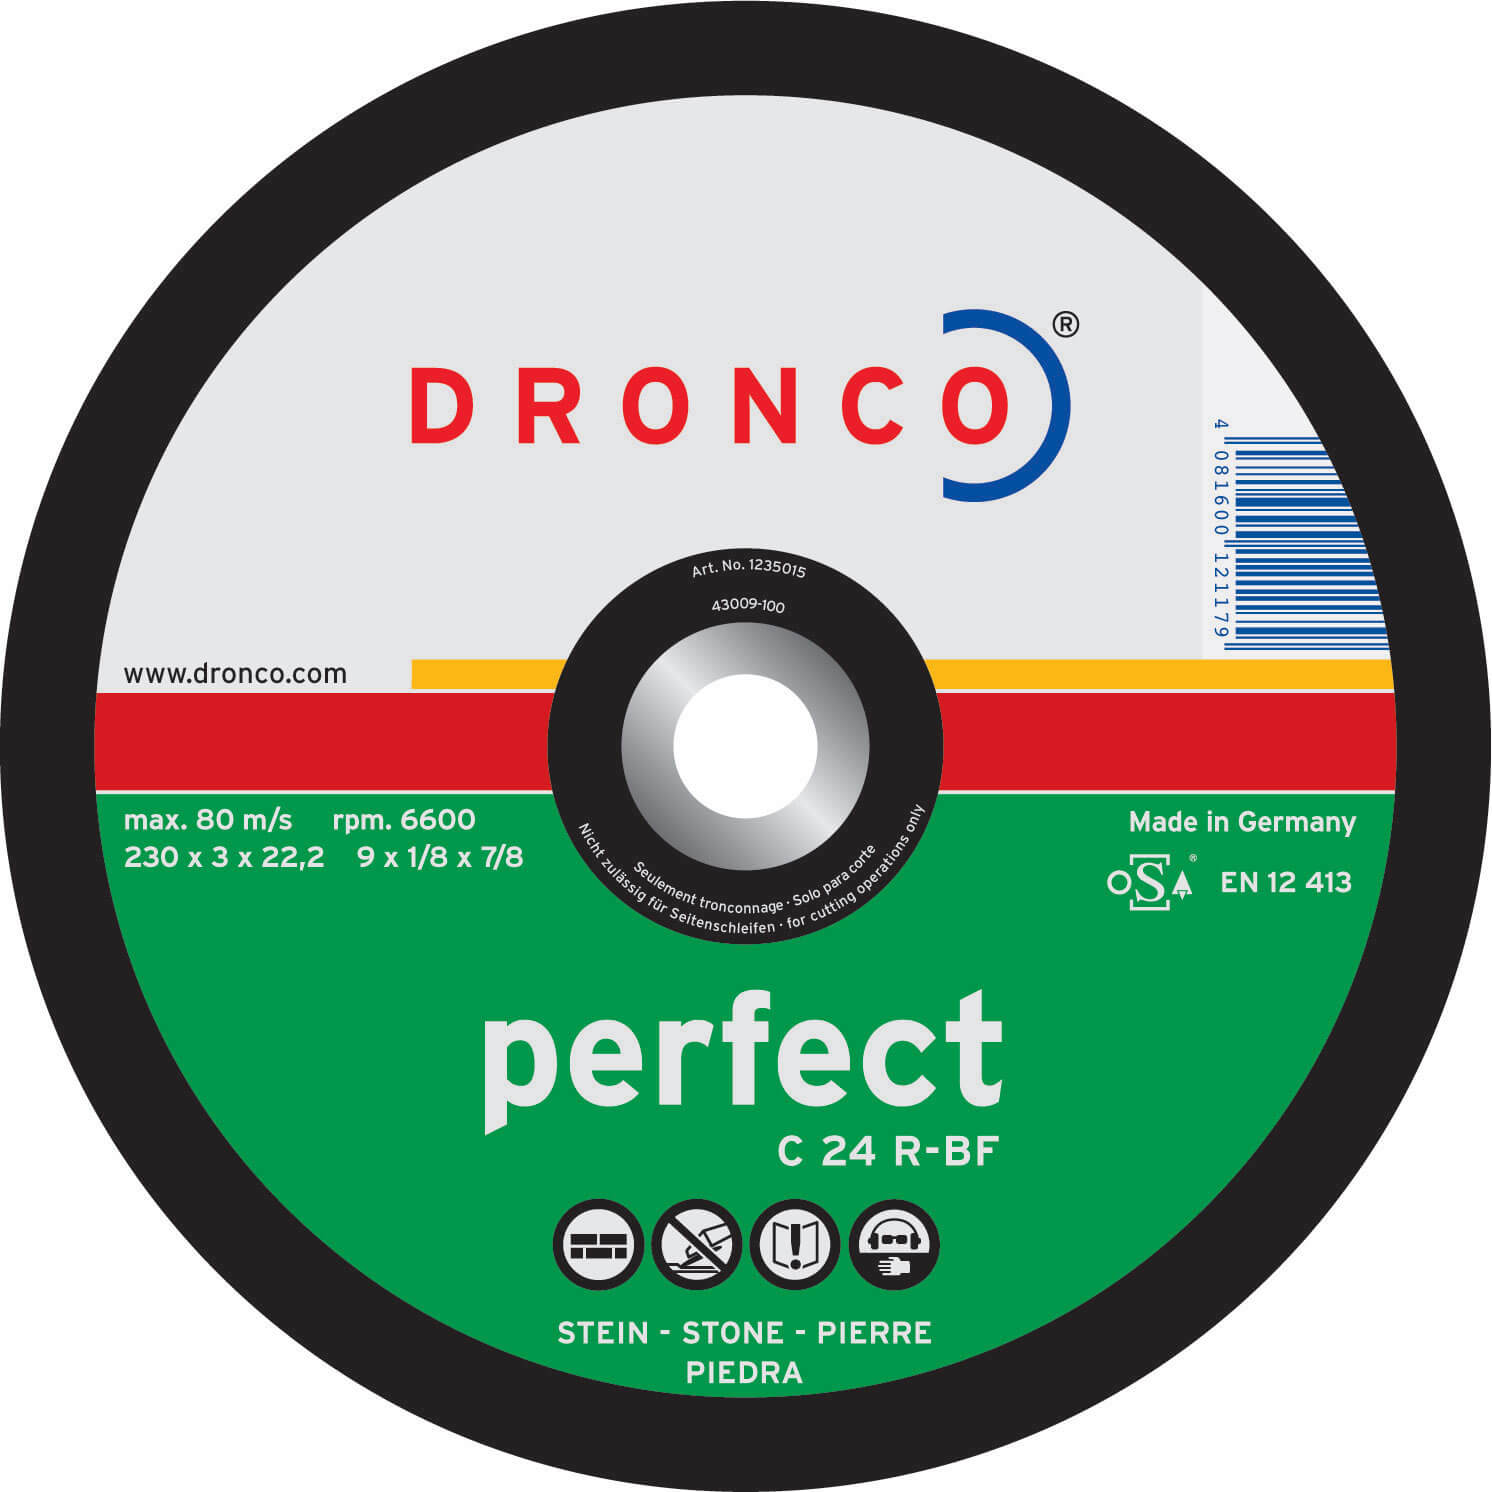 Dronco C 24 R PERFECT 100mm x 3mm x 16mm Bore Angle Grinder Flat Cutting Disc for Concrete & Stone